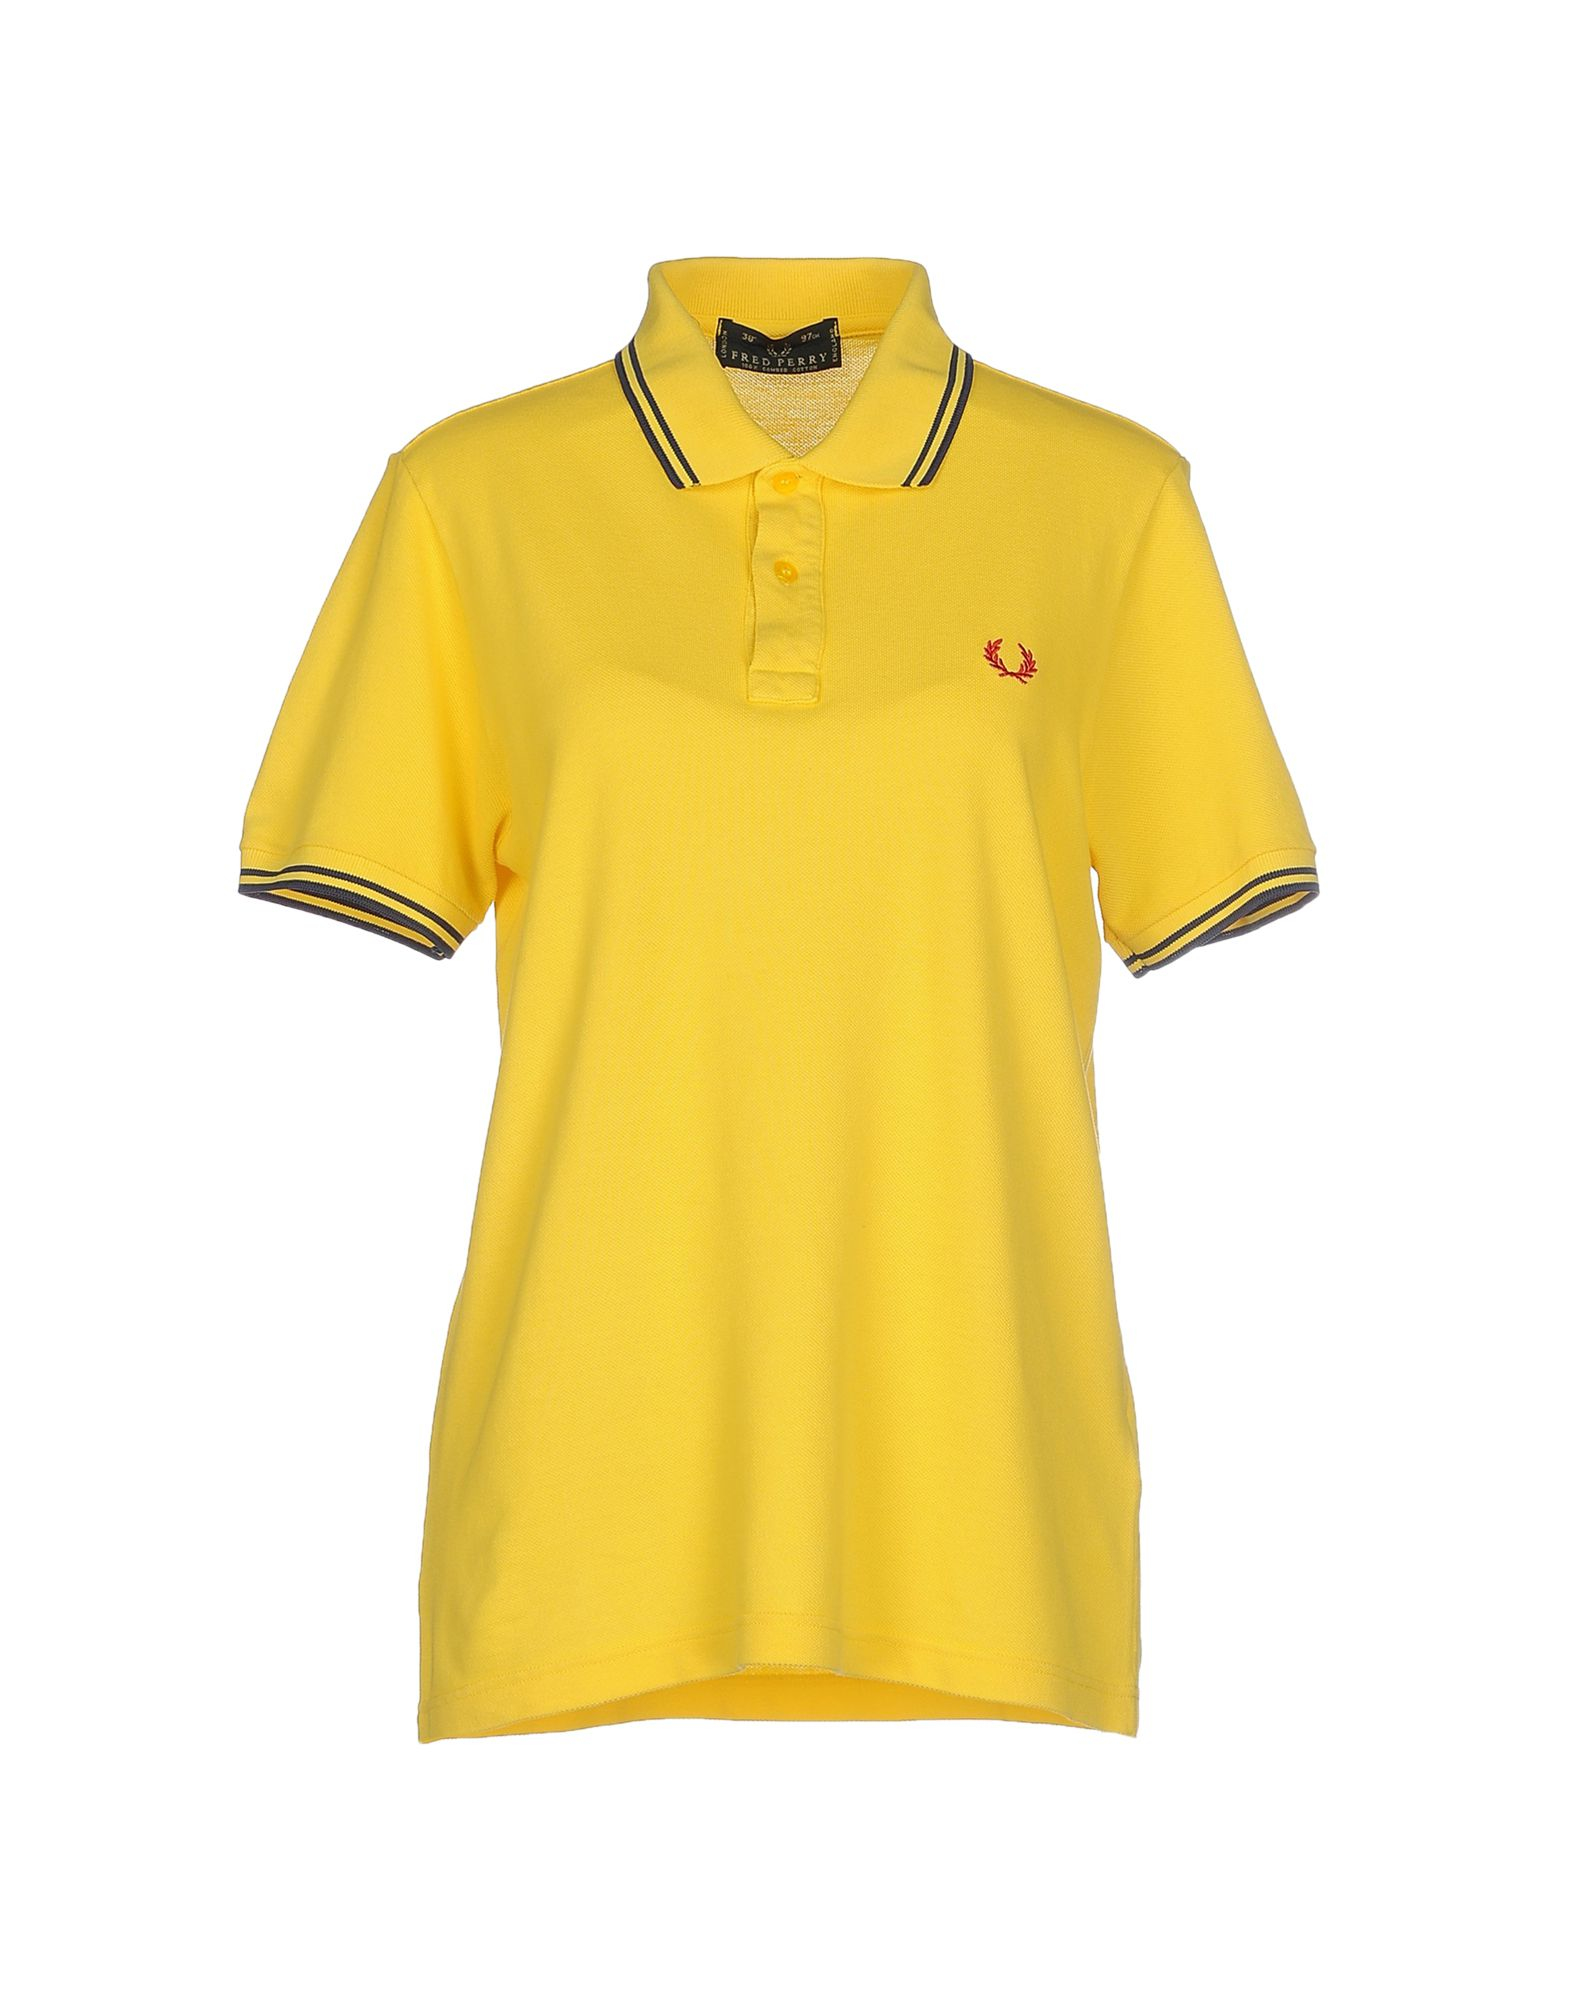 Lyst - Fred perry Polo Shirt in Yellow